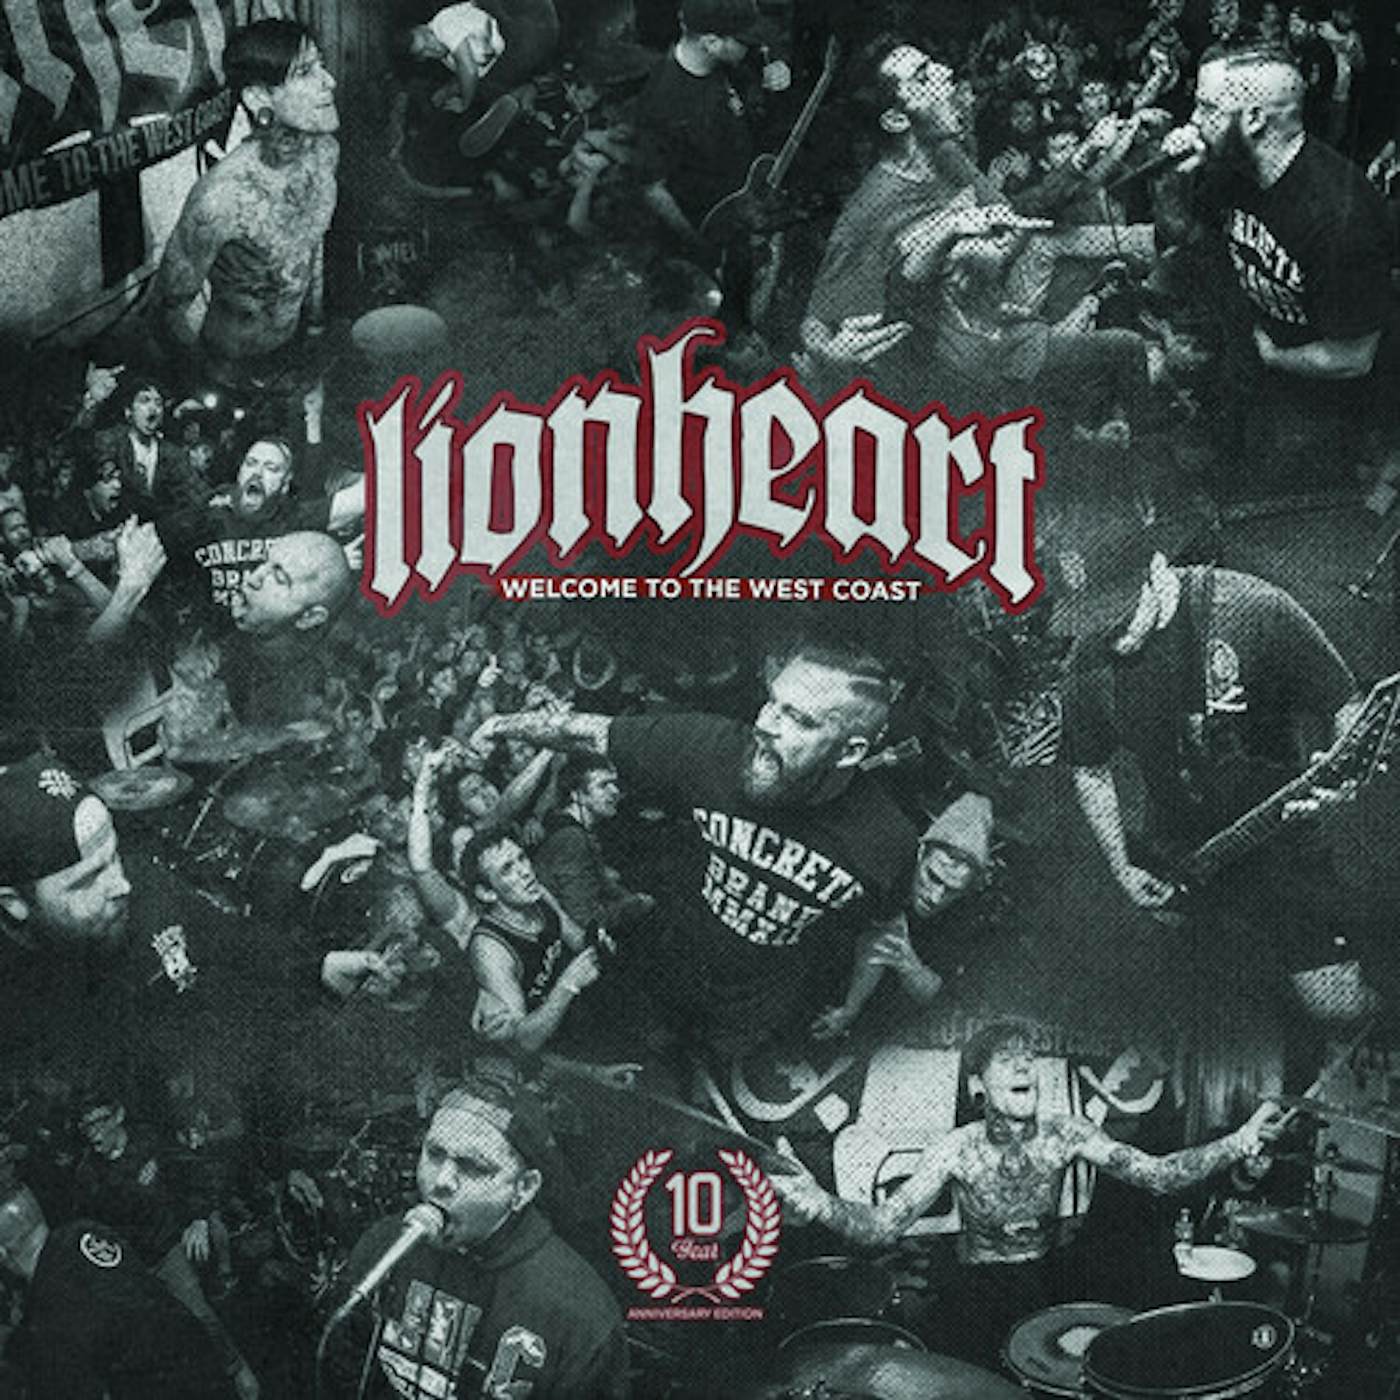 Lionheart WELCOME TO THE WEST COAST Vinyl Record